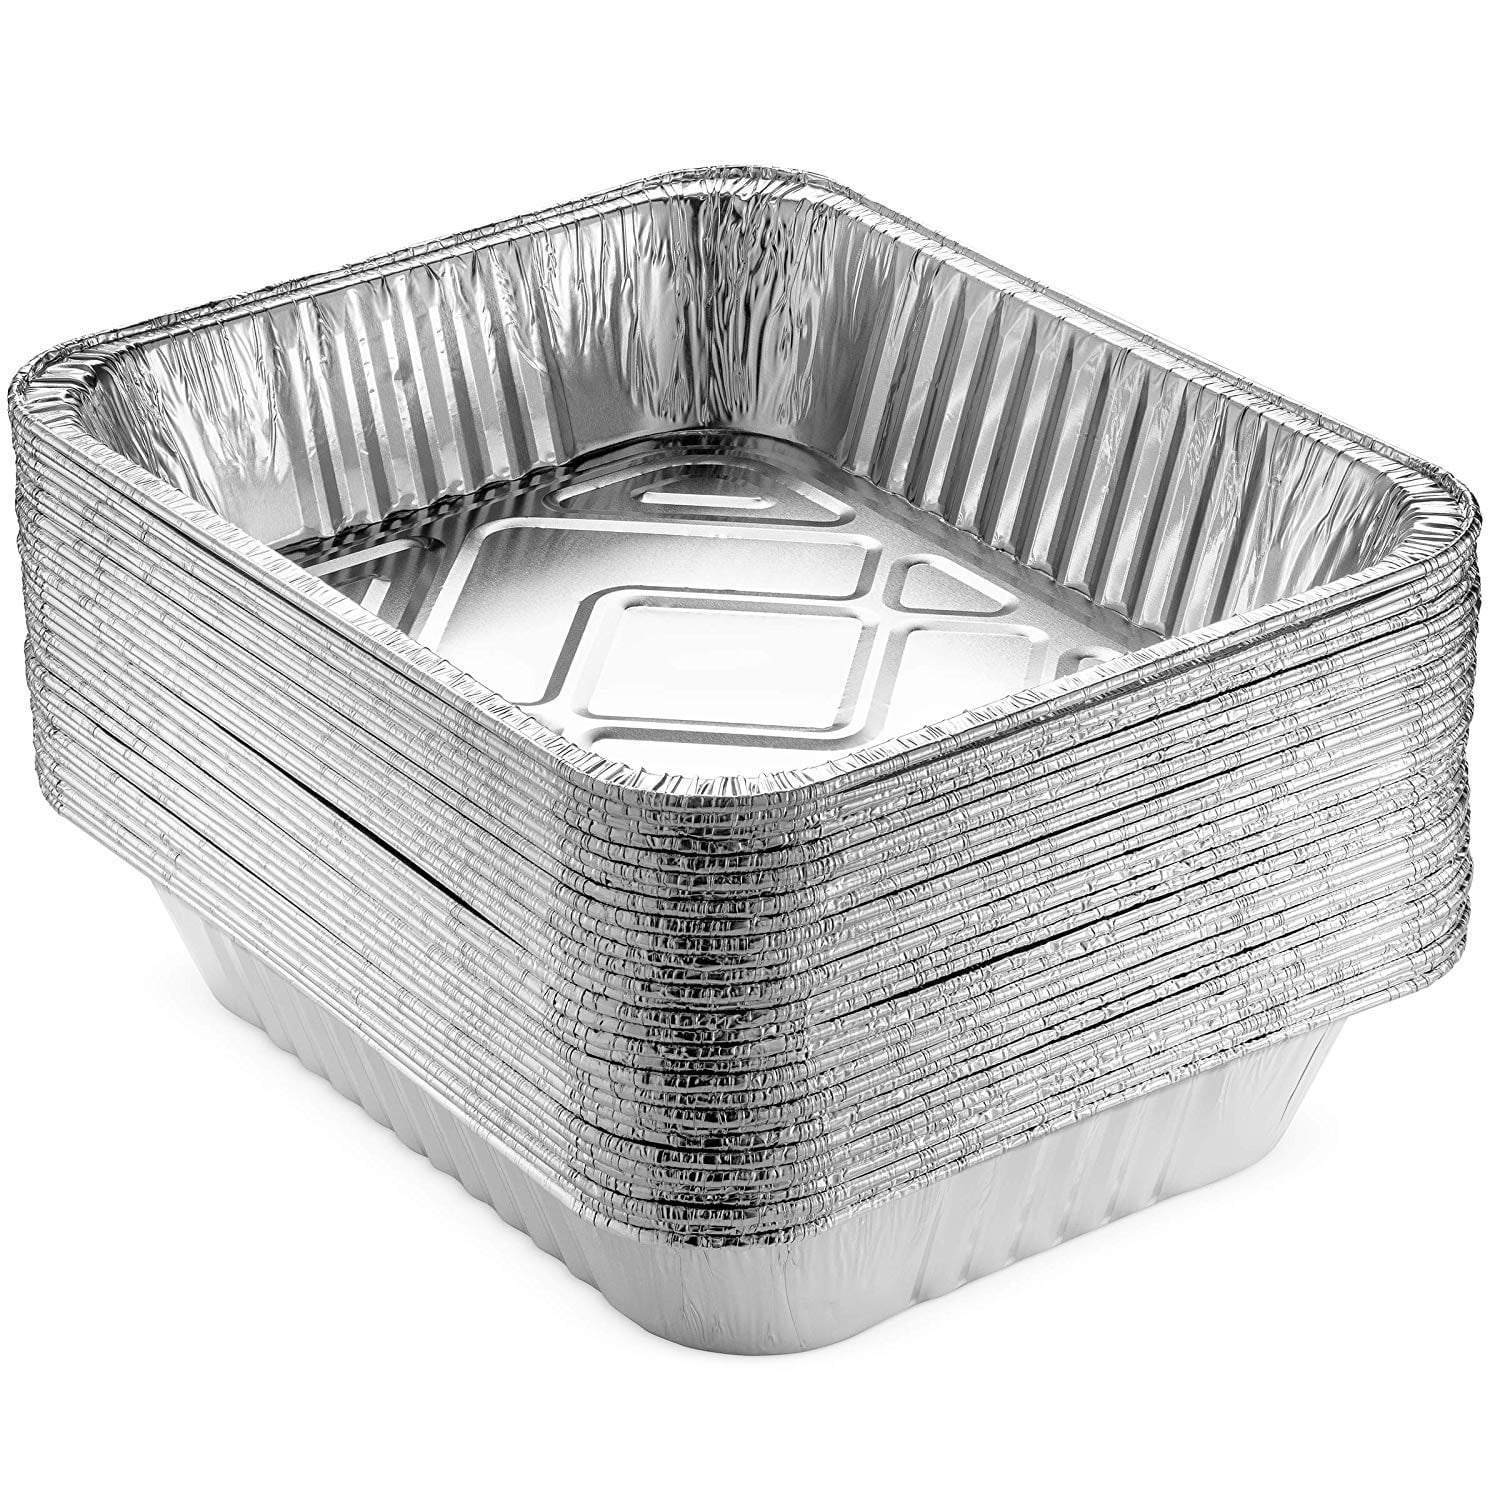 50 x 22" Silver Foil Platters Sandwich Trays Catering BBQ Party Buffet 